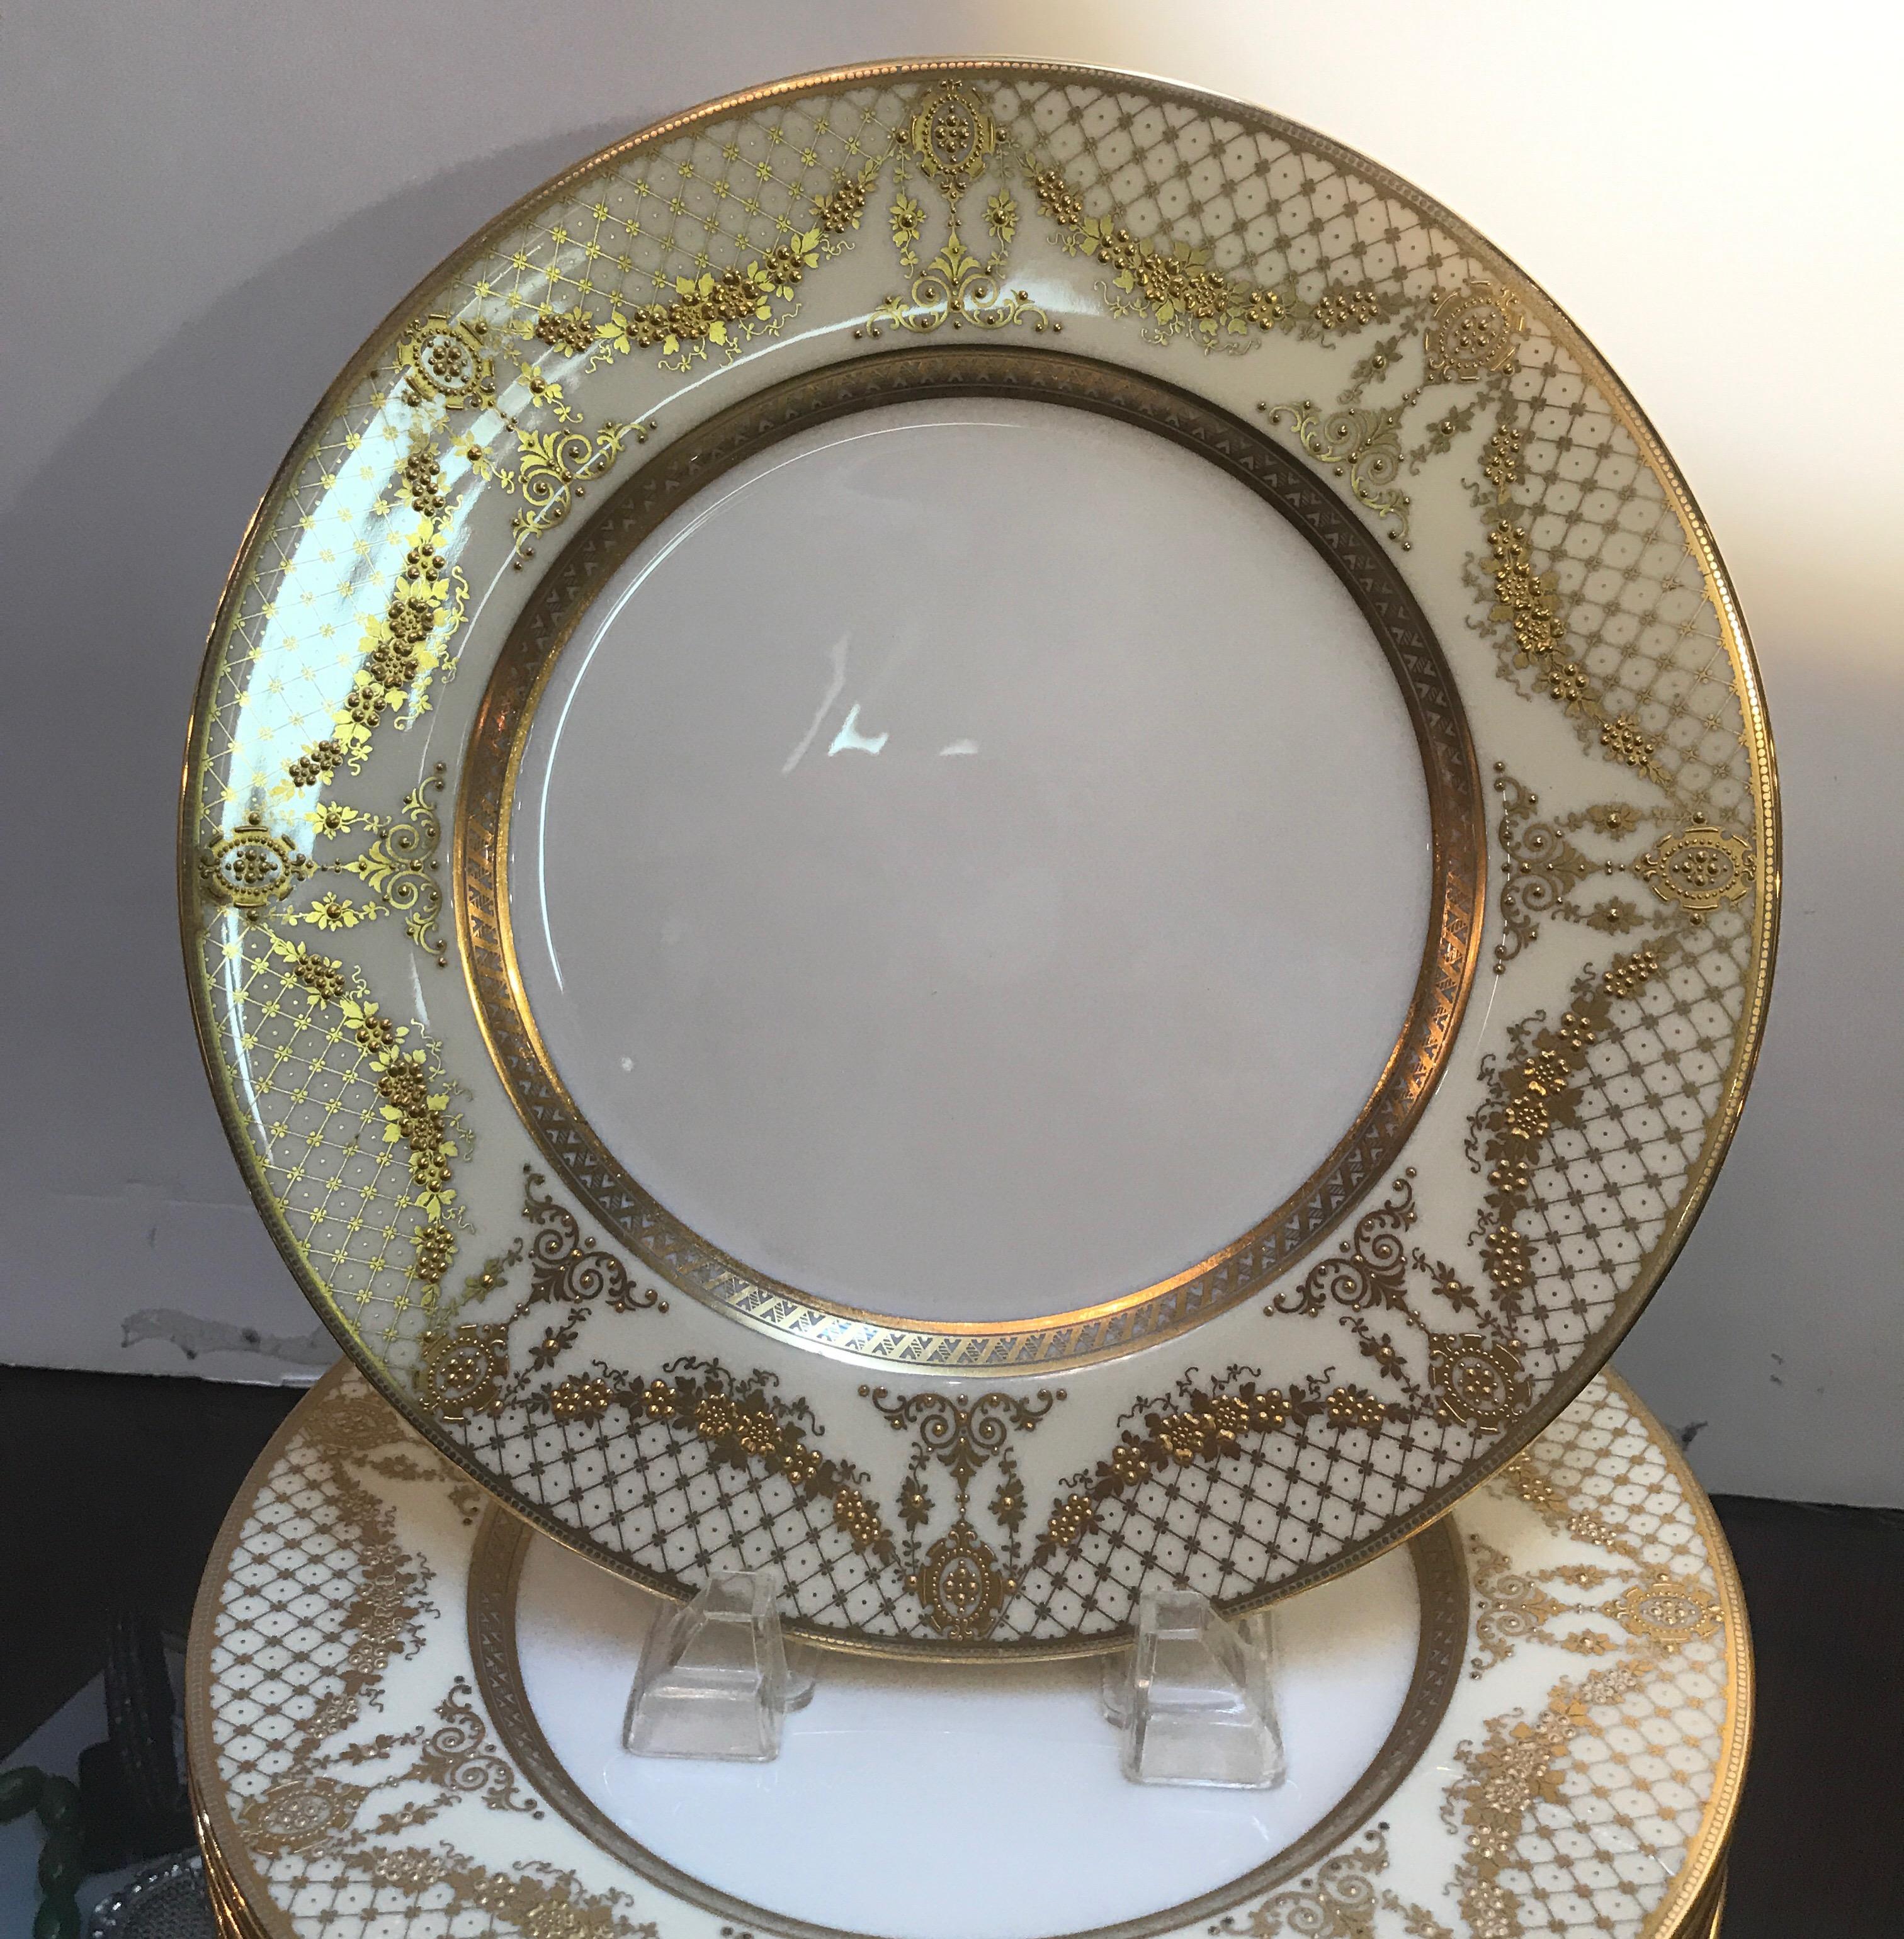 Elegant and graceful gilt service dinner plates with an early 20th century green wreath Lenox mark. The set was a custom pattern and in a lavish gold with slightly off white background. These plates will compliment almost any formal pattern in any